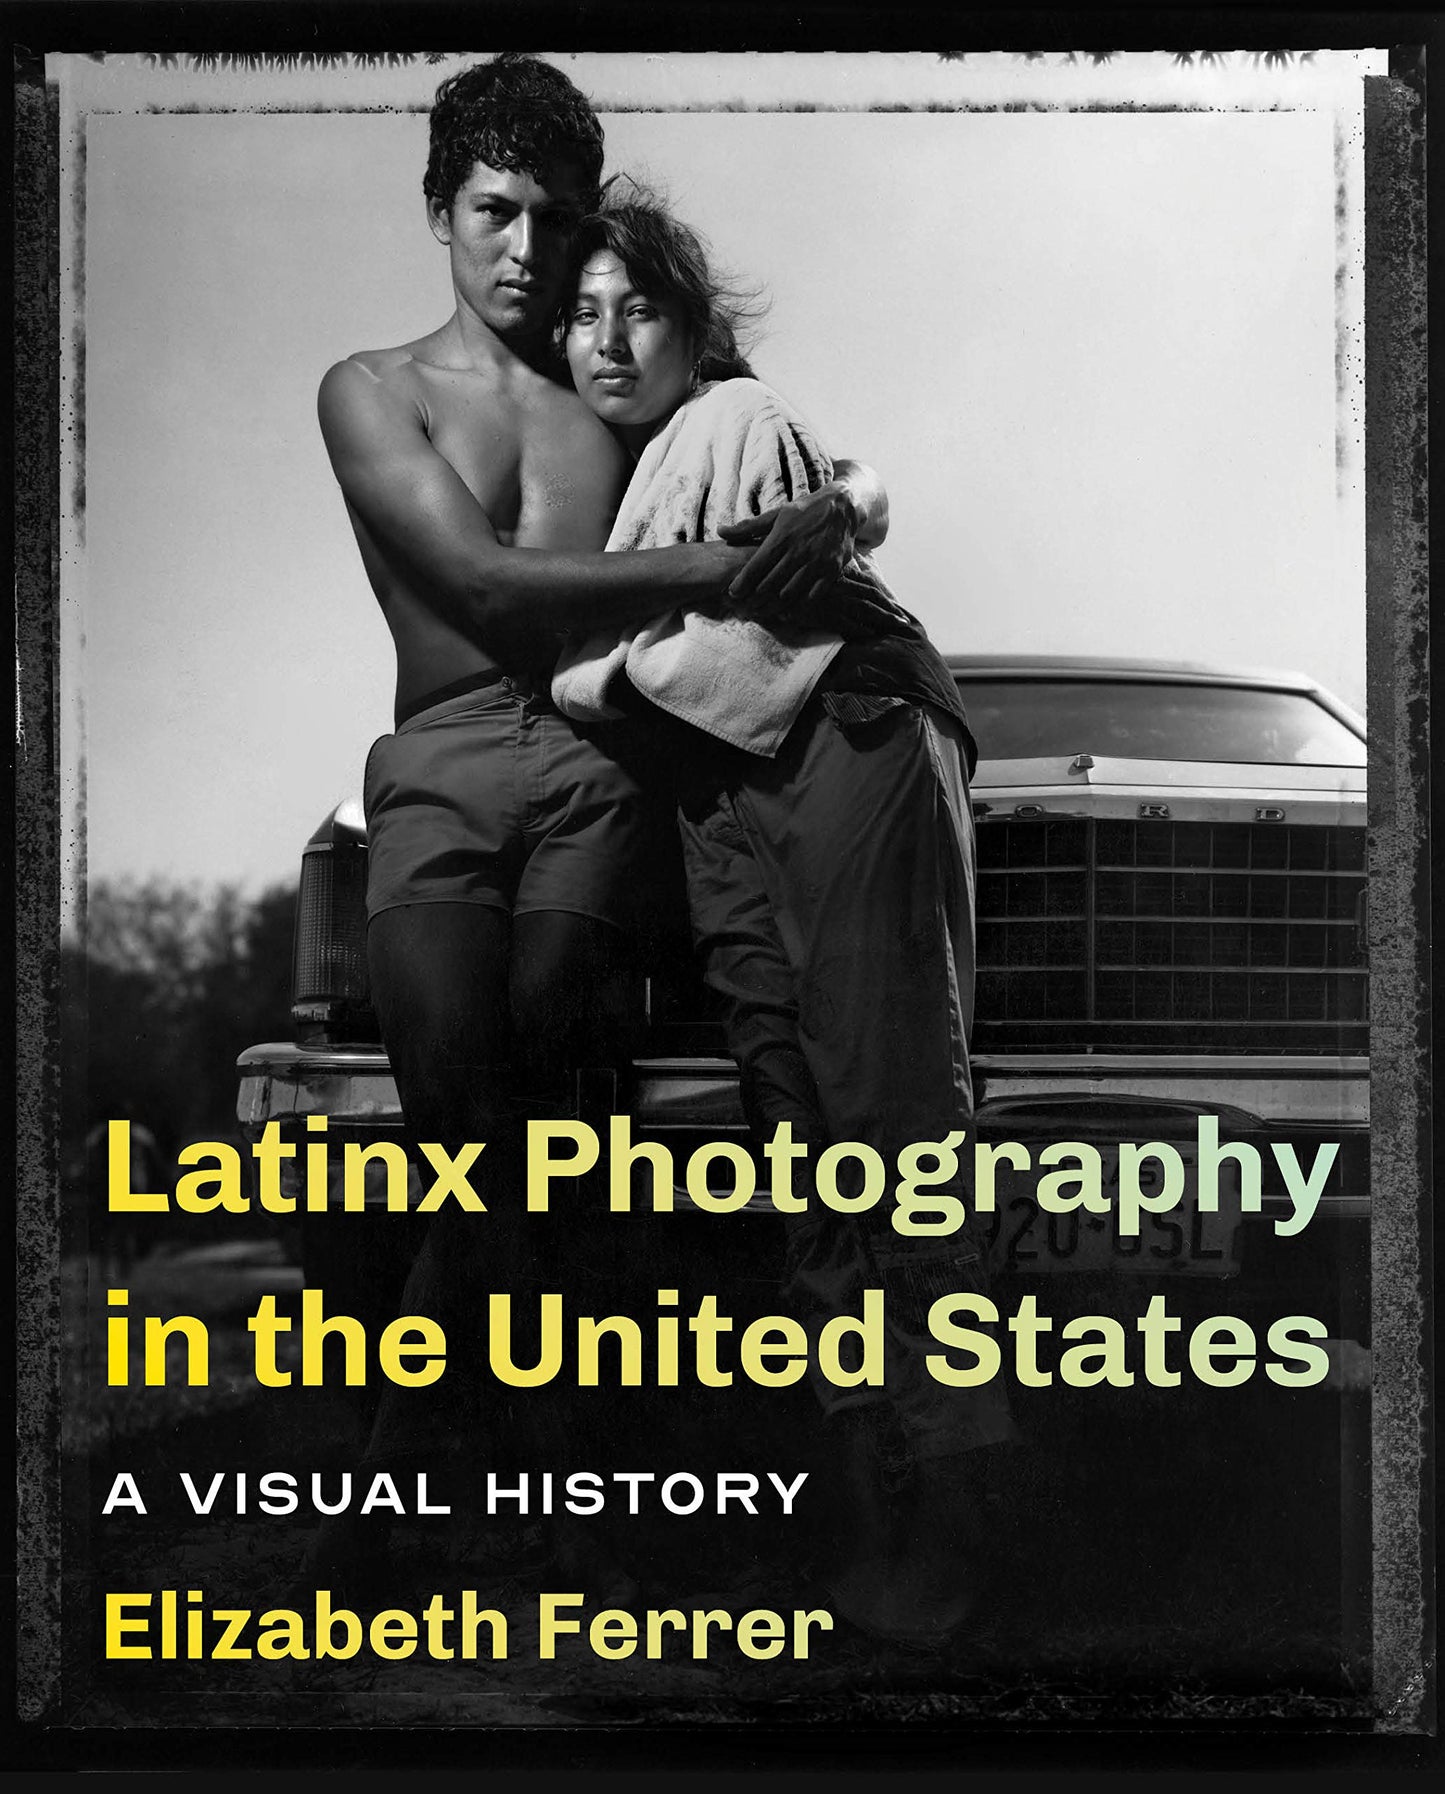 Latinx Photography in the United States // A Visual History